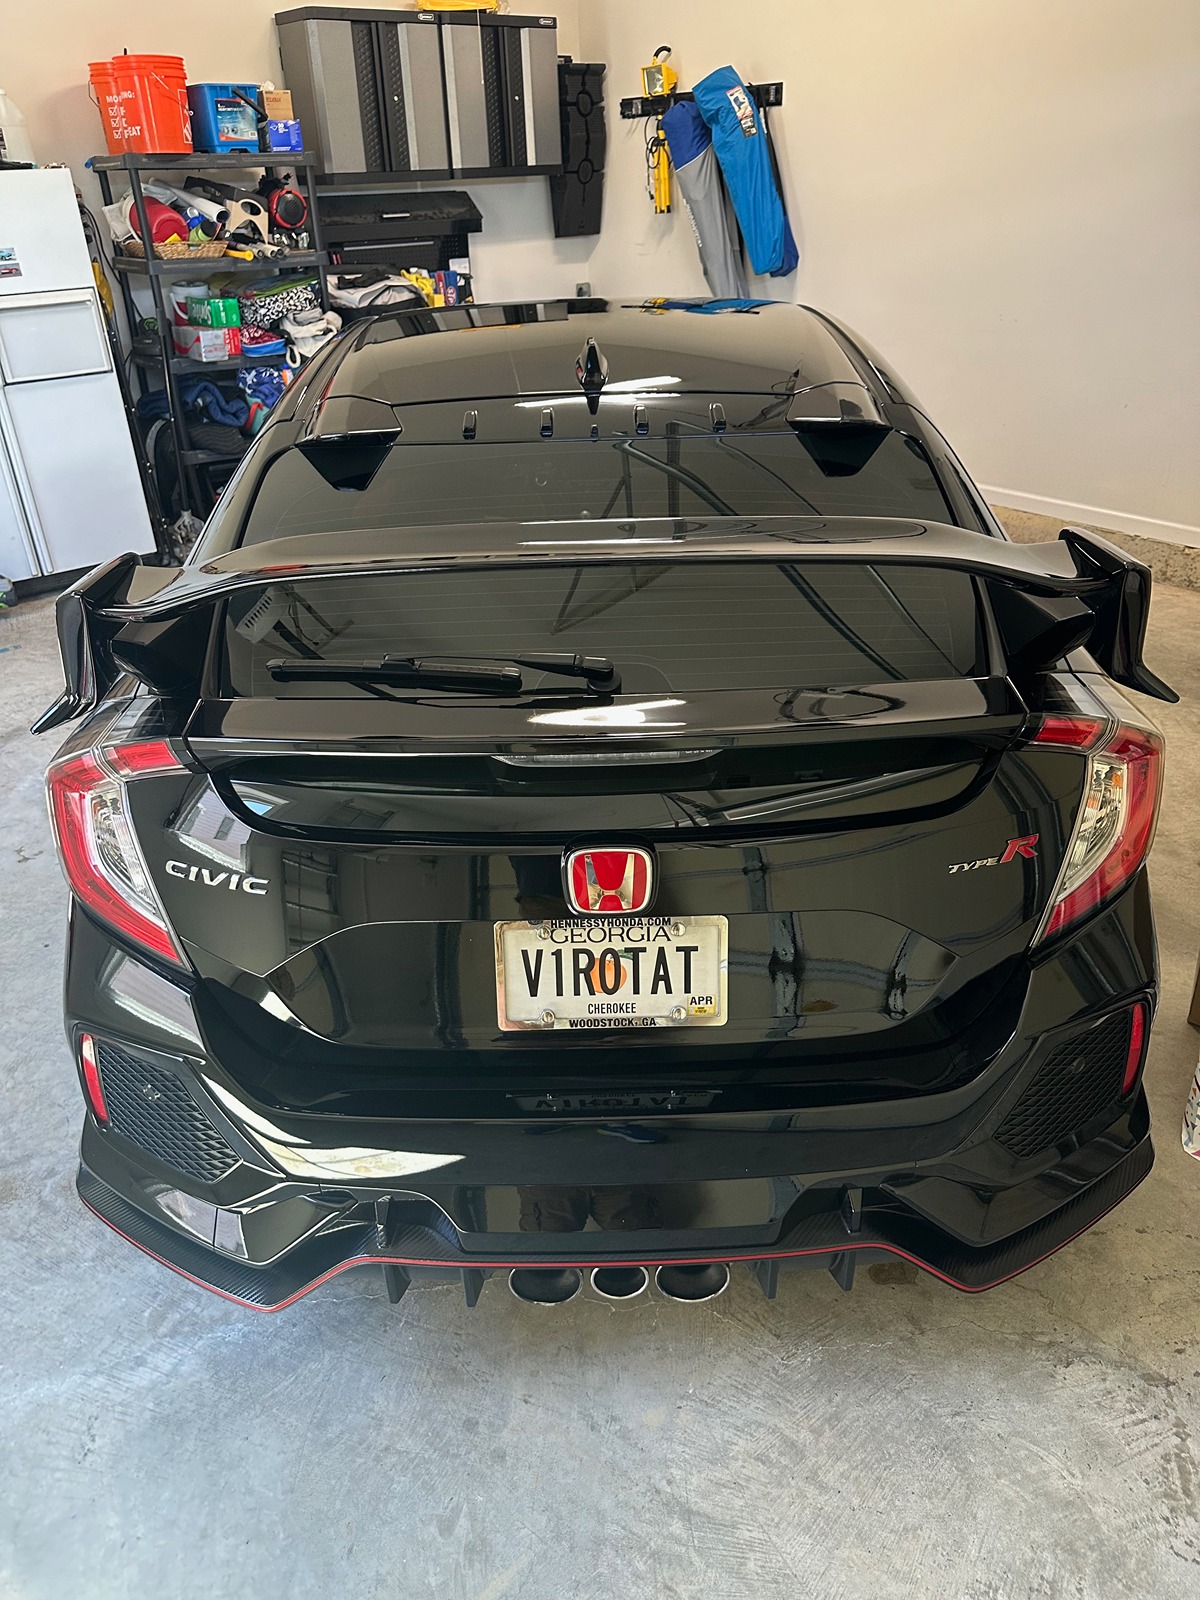 Honda Civic 10th gen Sold. 2019 Civic Type R for sale IMG_8220